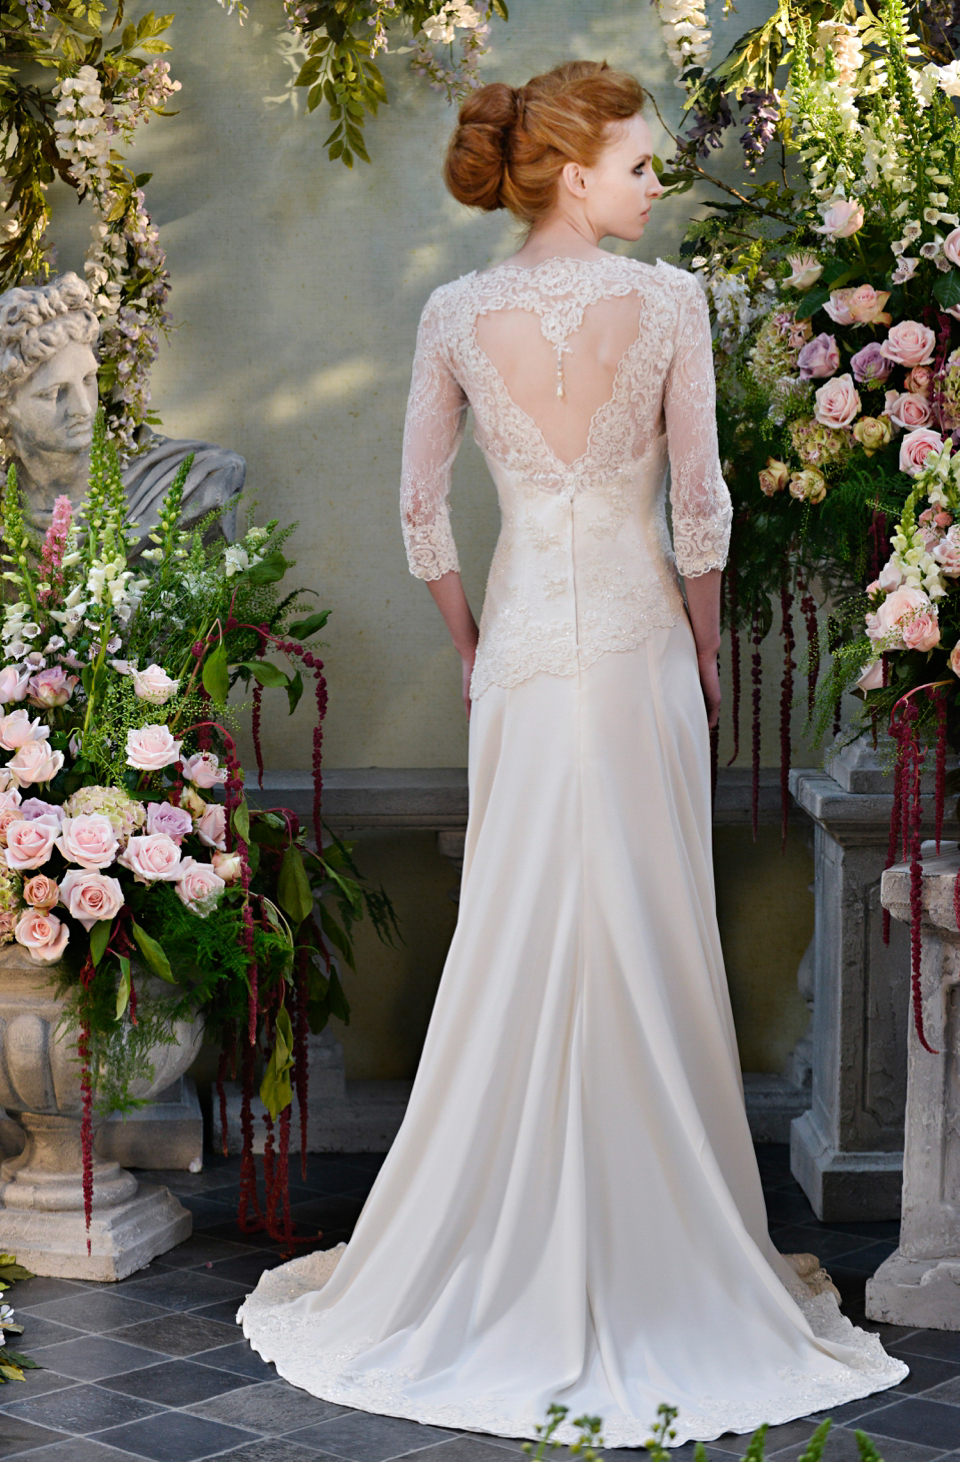 Entice Wedding Dress from Terry Fox's Siren Song Collection